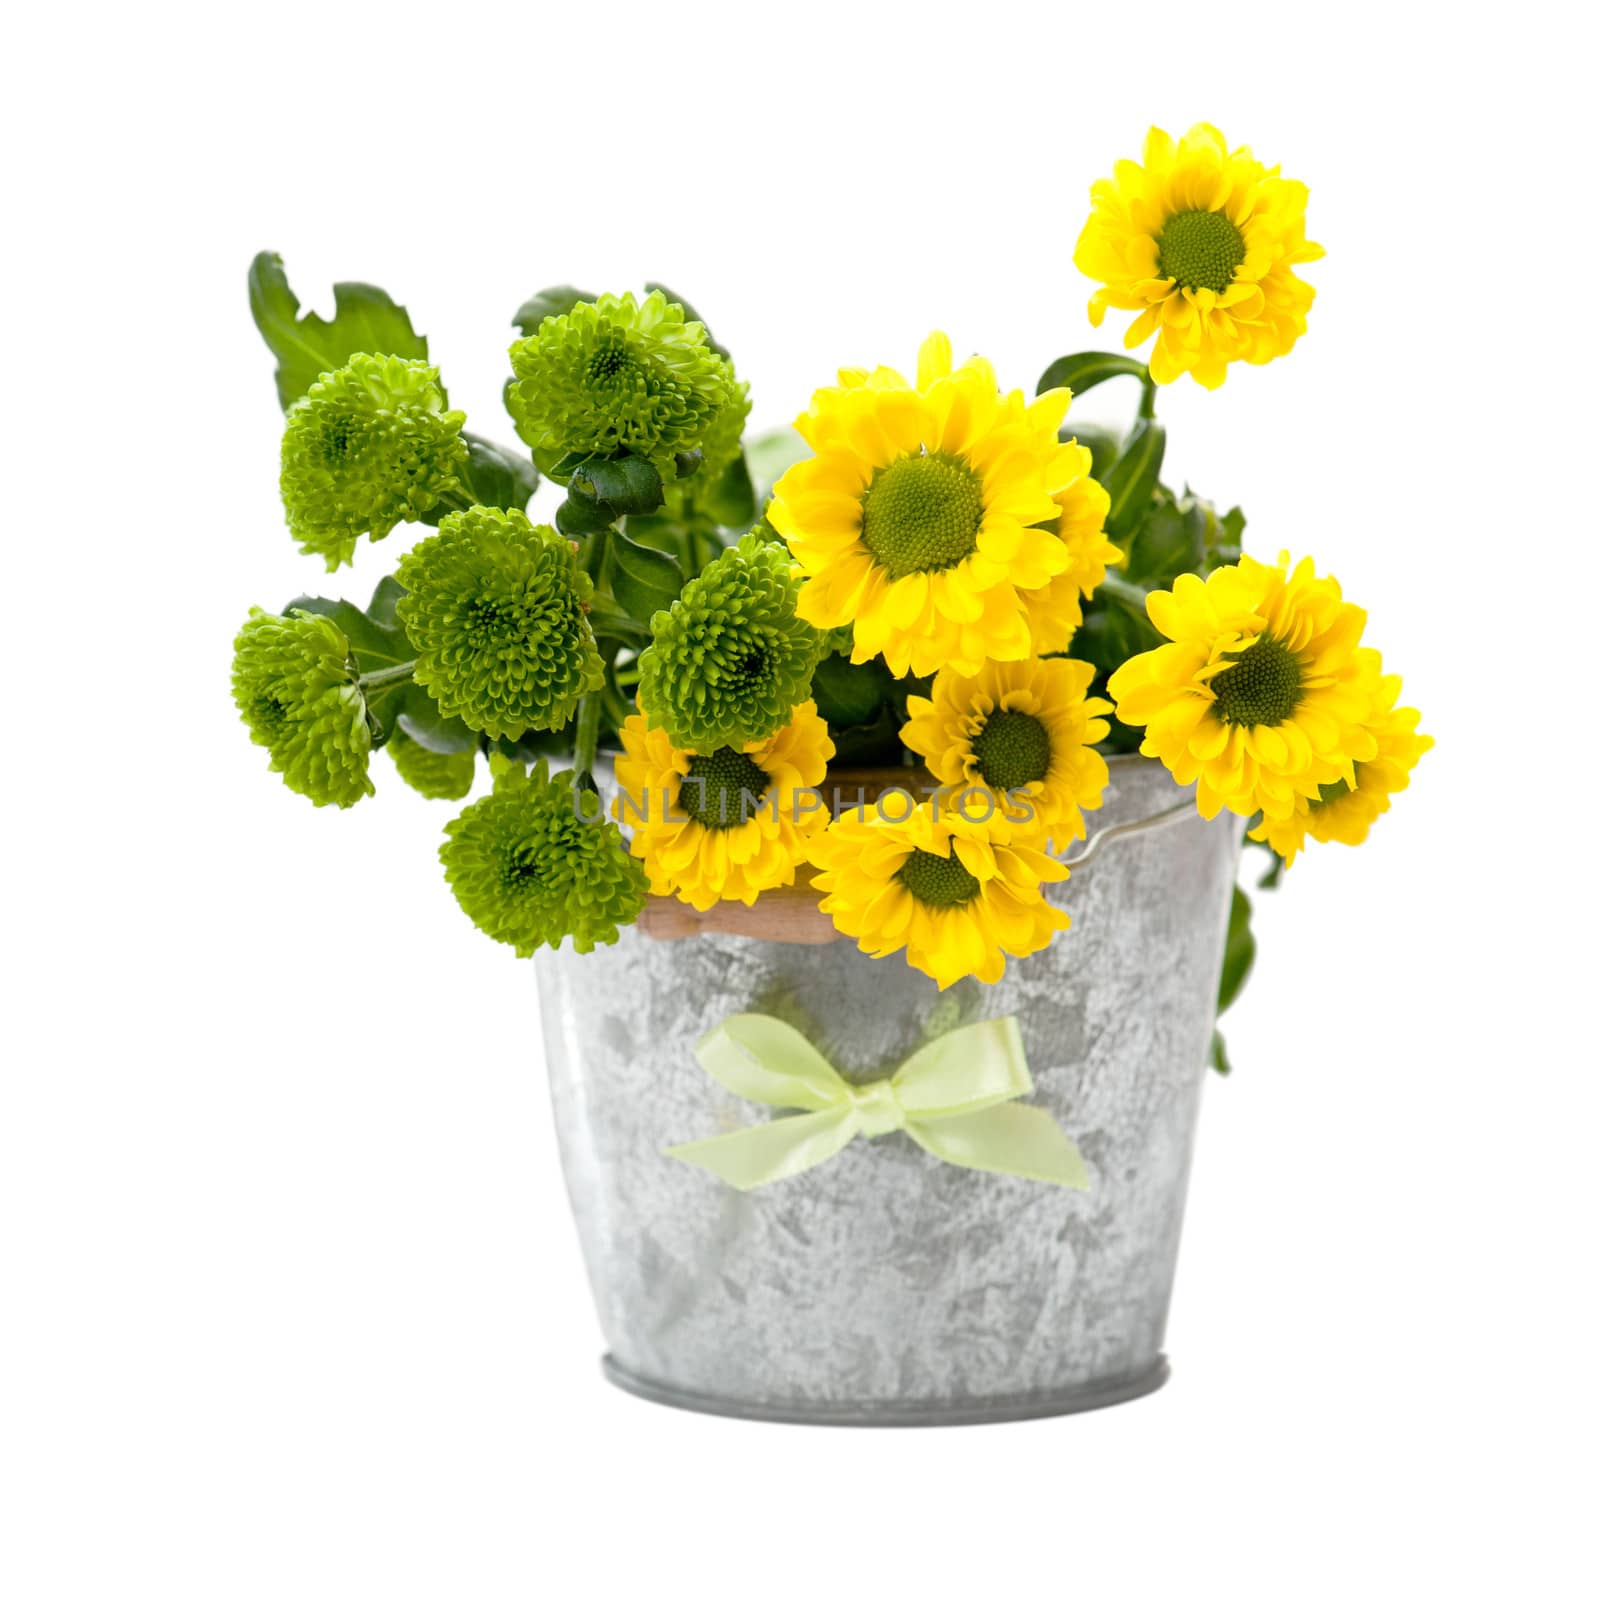 Yellow and green flowers in  bucket by iribo